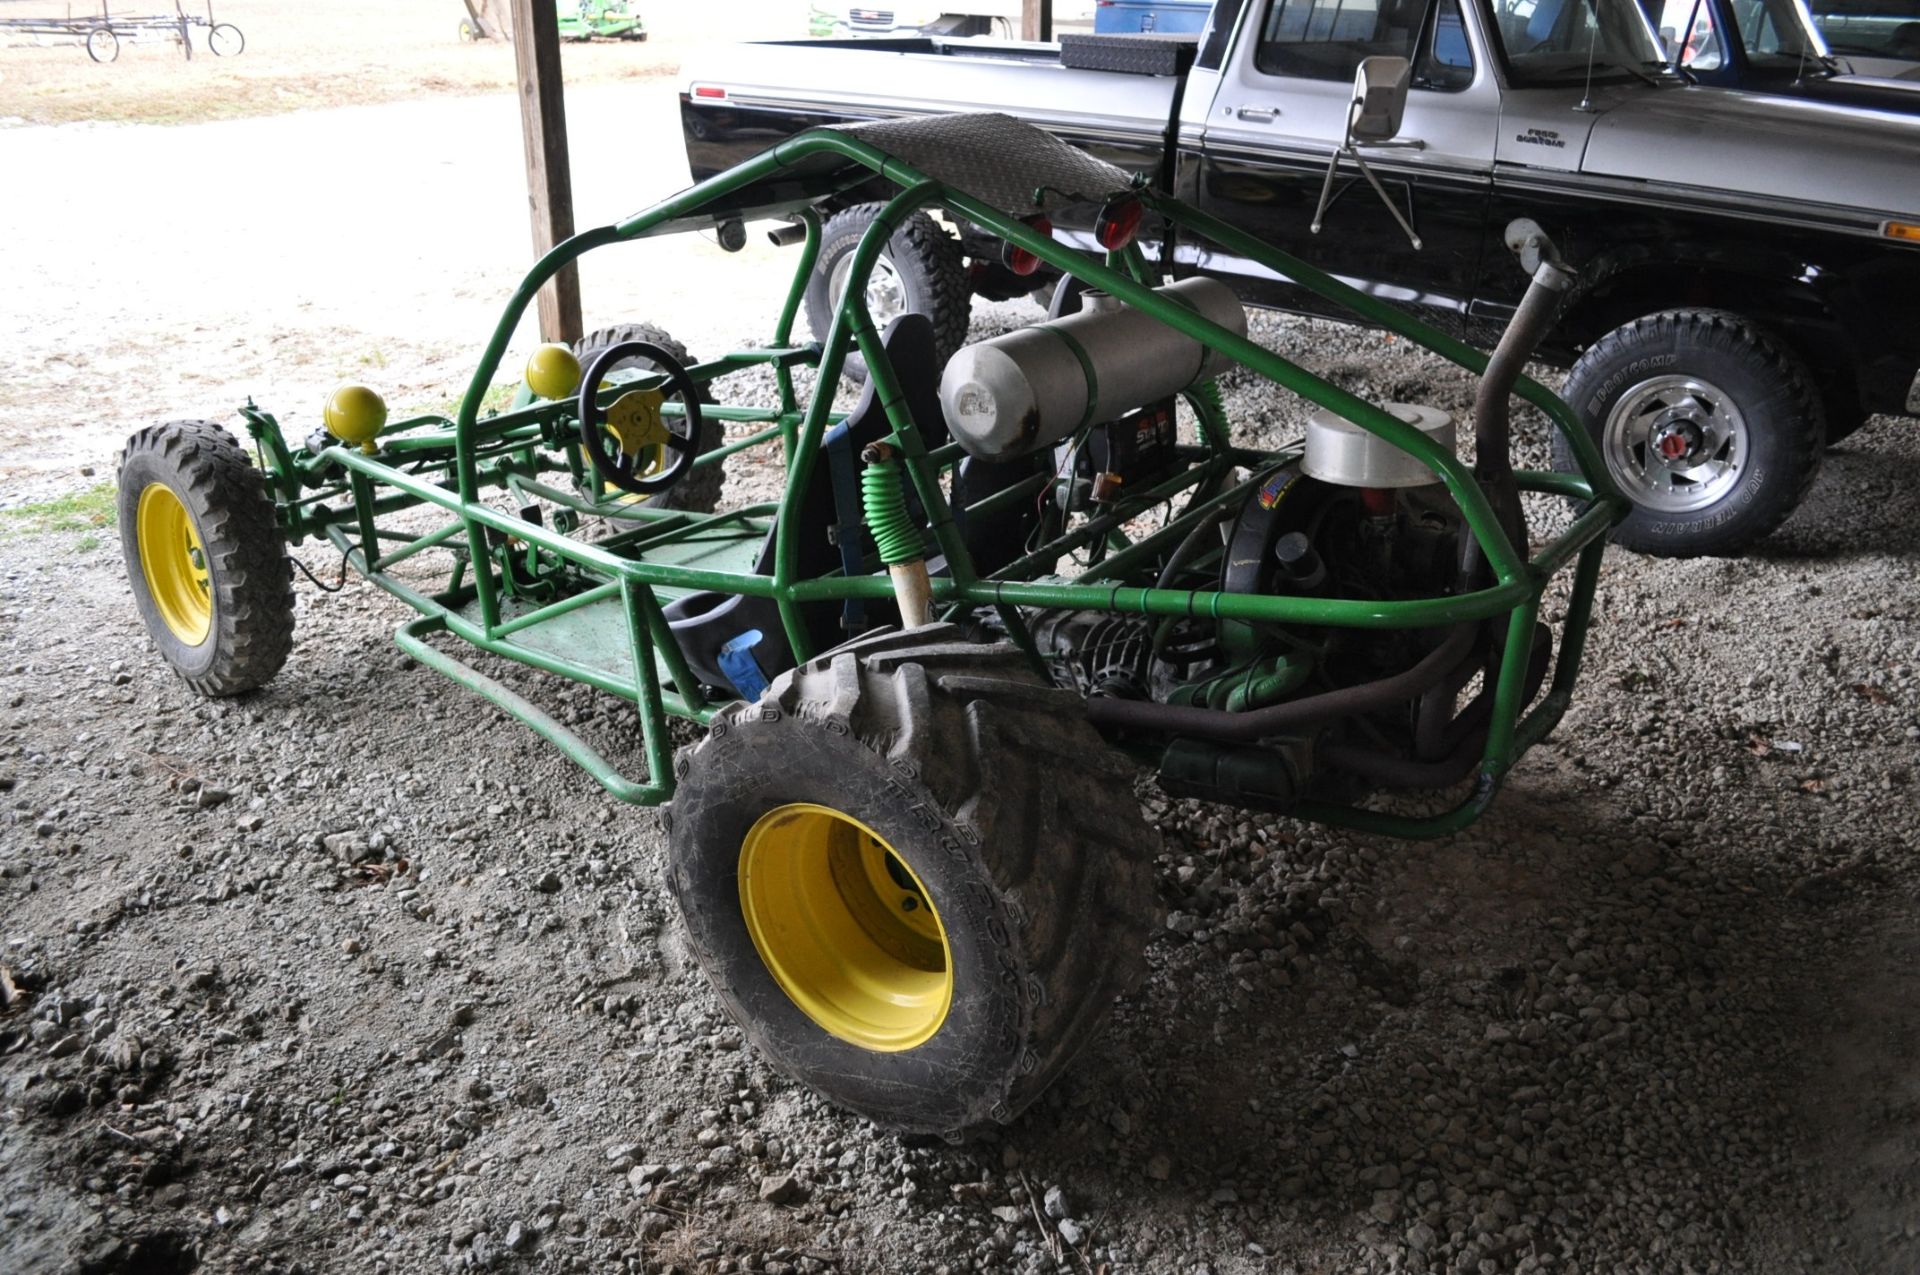 Dune buggy, VW air-cooled gas engine, 31 x 15.5-15 rear, 6.70-15LT front - Image 3 of 10